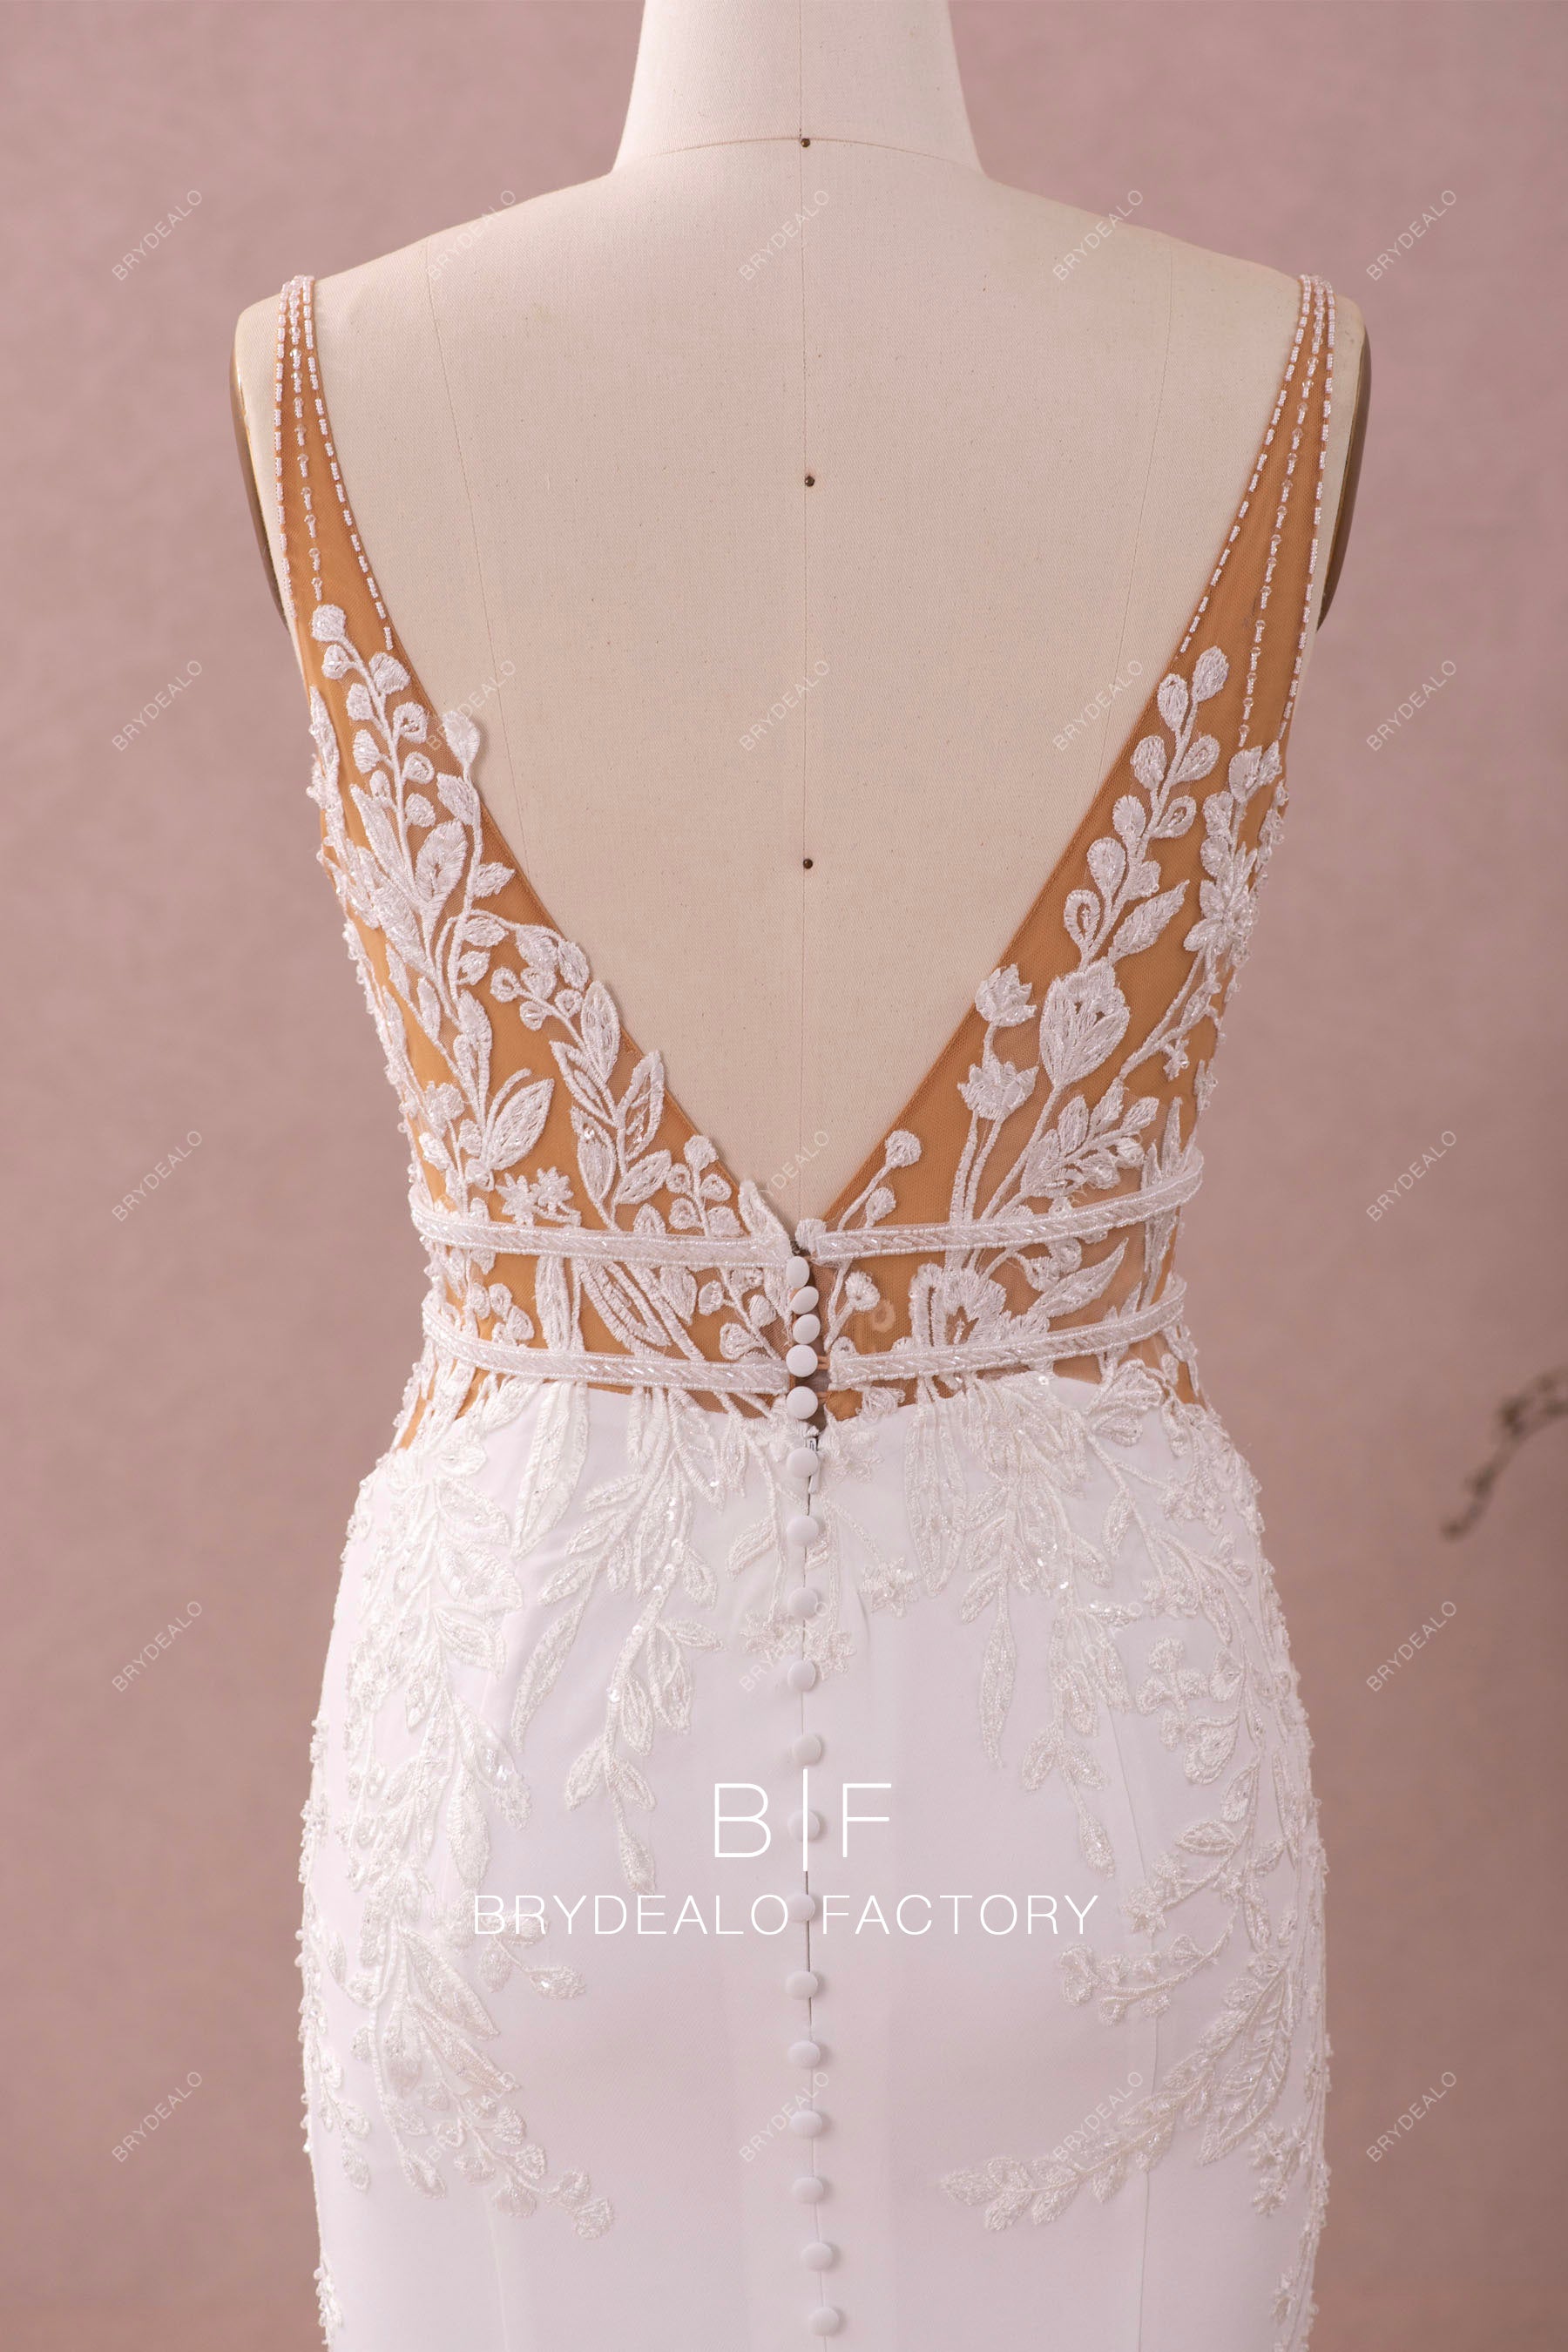 v-cut beaded lace belts wedding gown